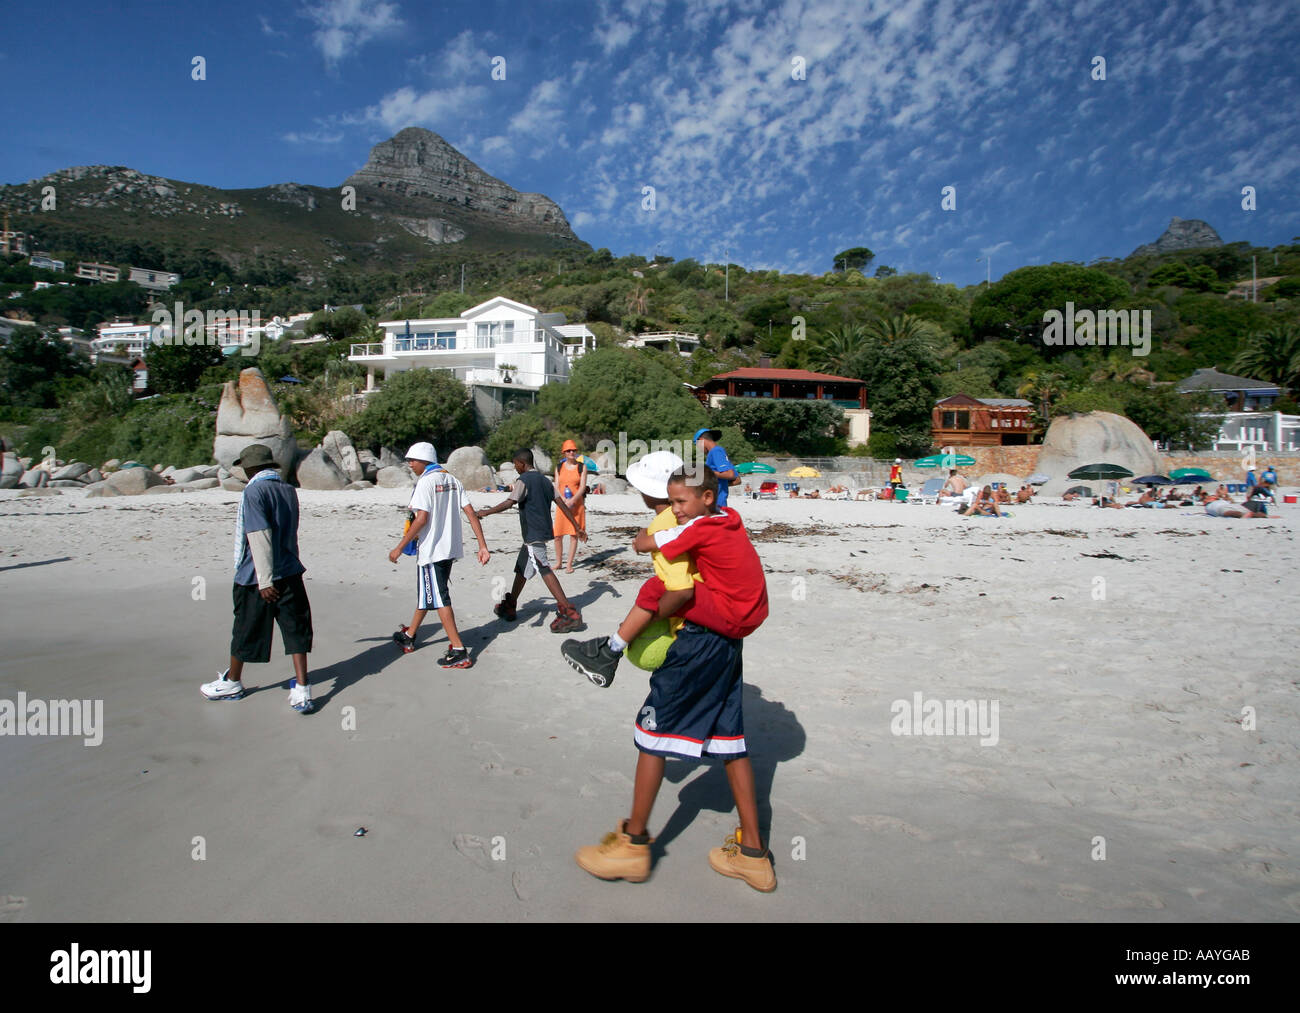 south africa cape town clifton beach kids Stock Photo